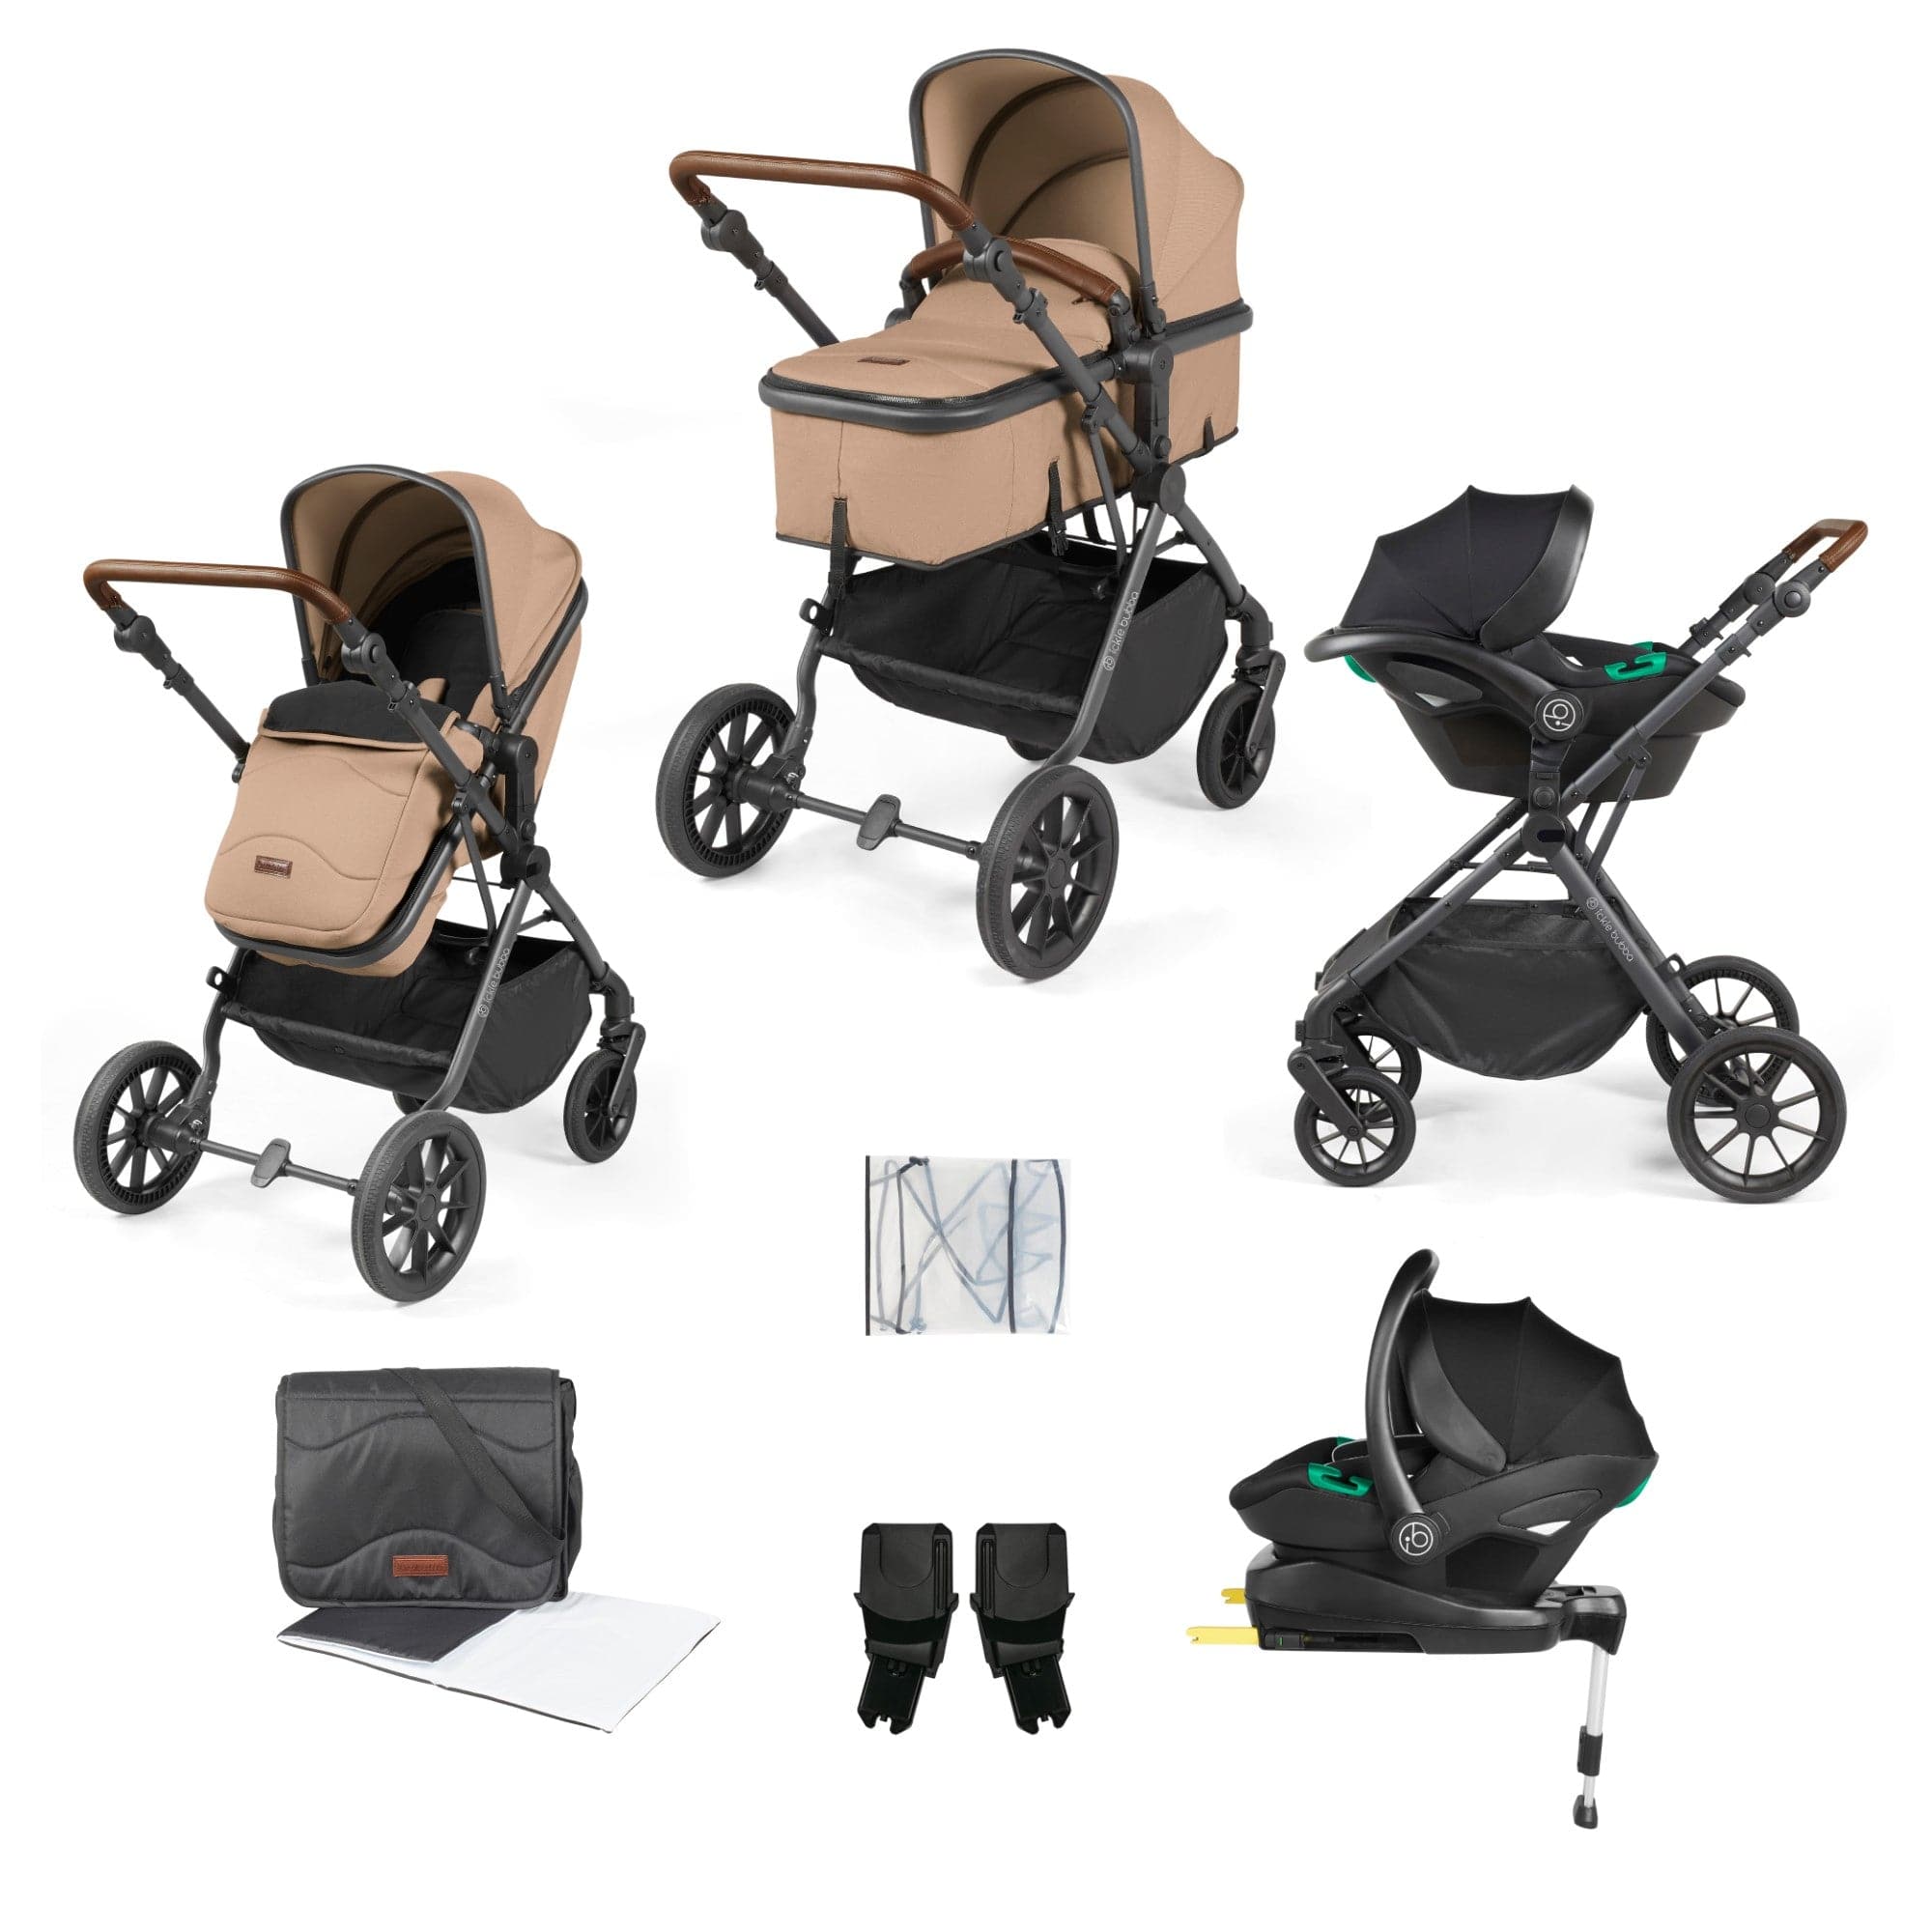 Ickle Bubba Cosmo I-Size Travel System With Stratus Car Seat & Isofix Base - Desert - For Your Little One